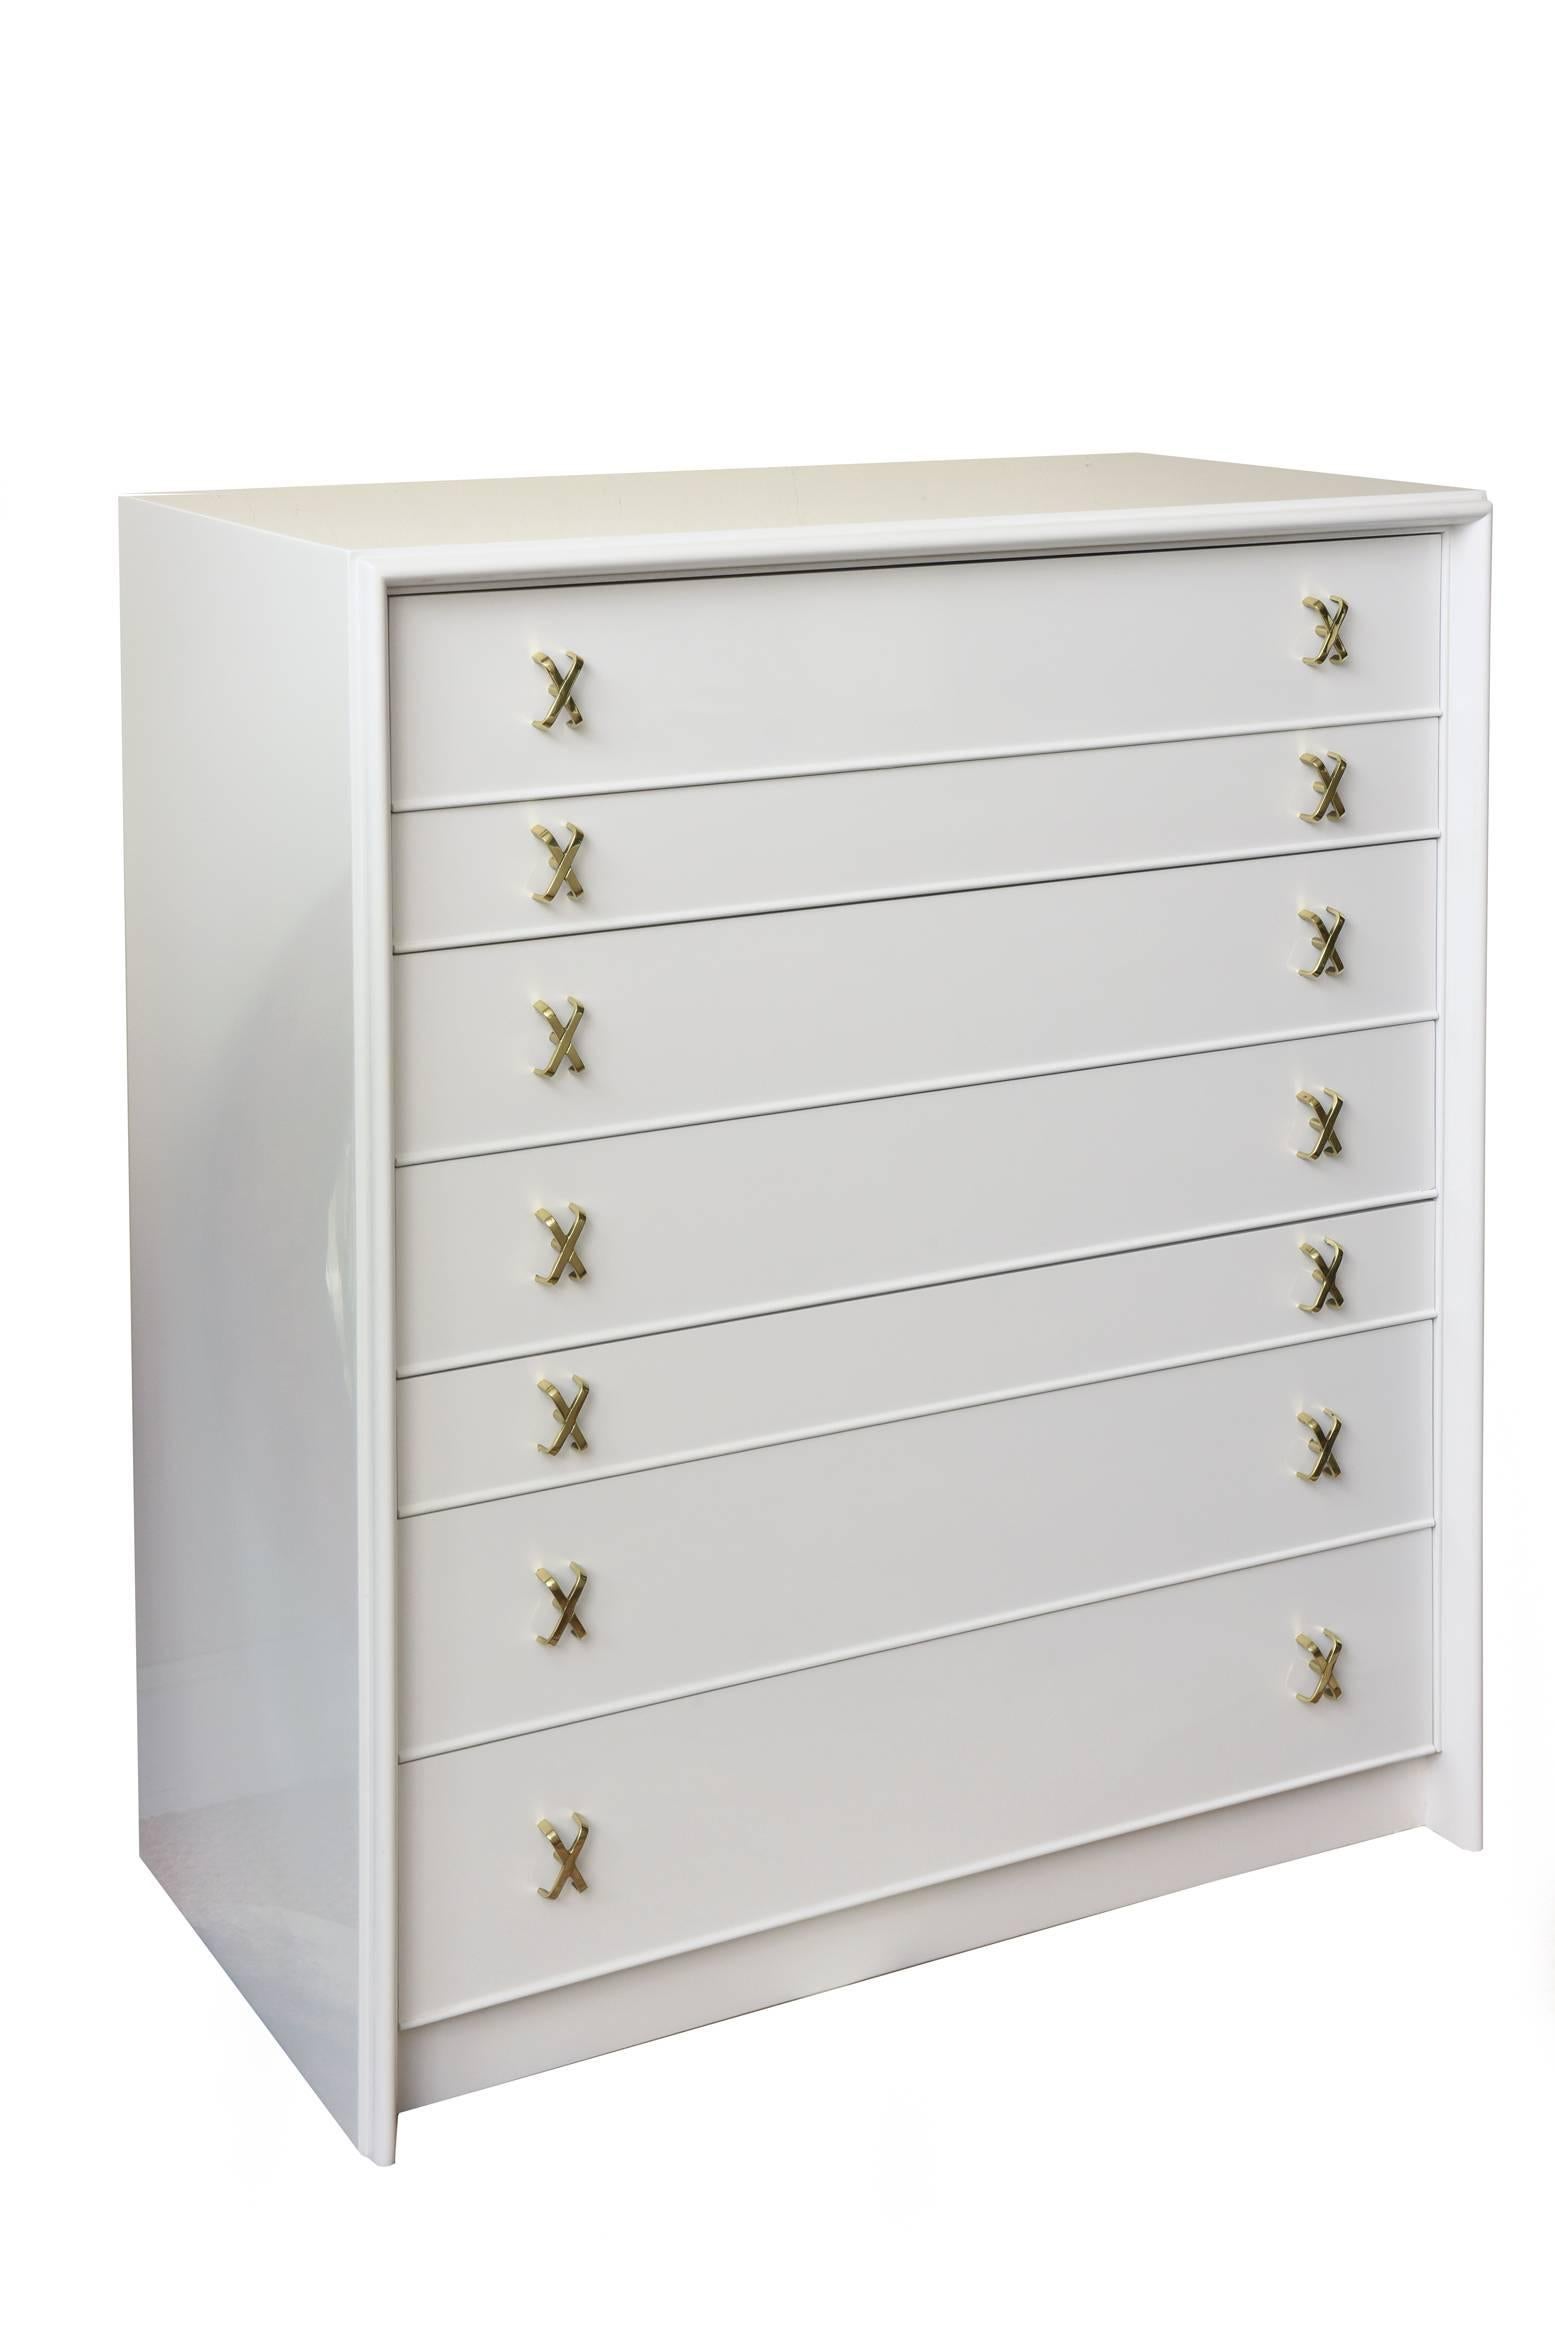 This high dresser by Paul Frankl for Johnson Furniture Co. consisting of seven assorted size drawers has been newly restored with white lacquer 45 with the iconic X-pulls in polished solid brass. It is Mid-Century that is so modernist and